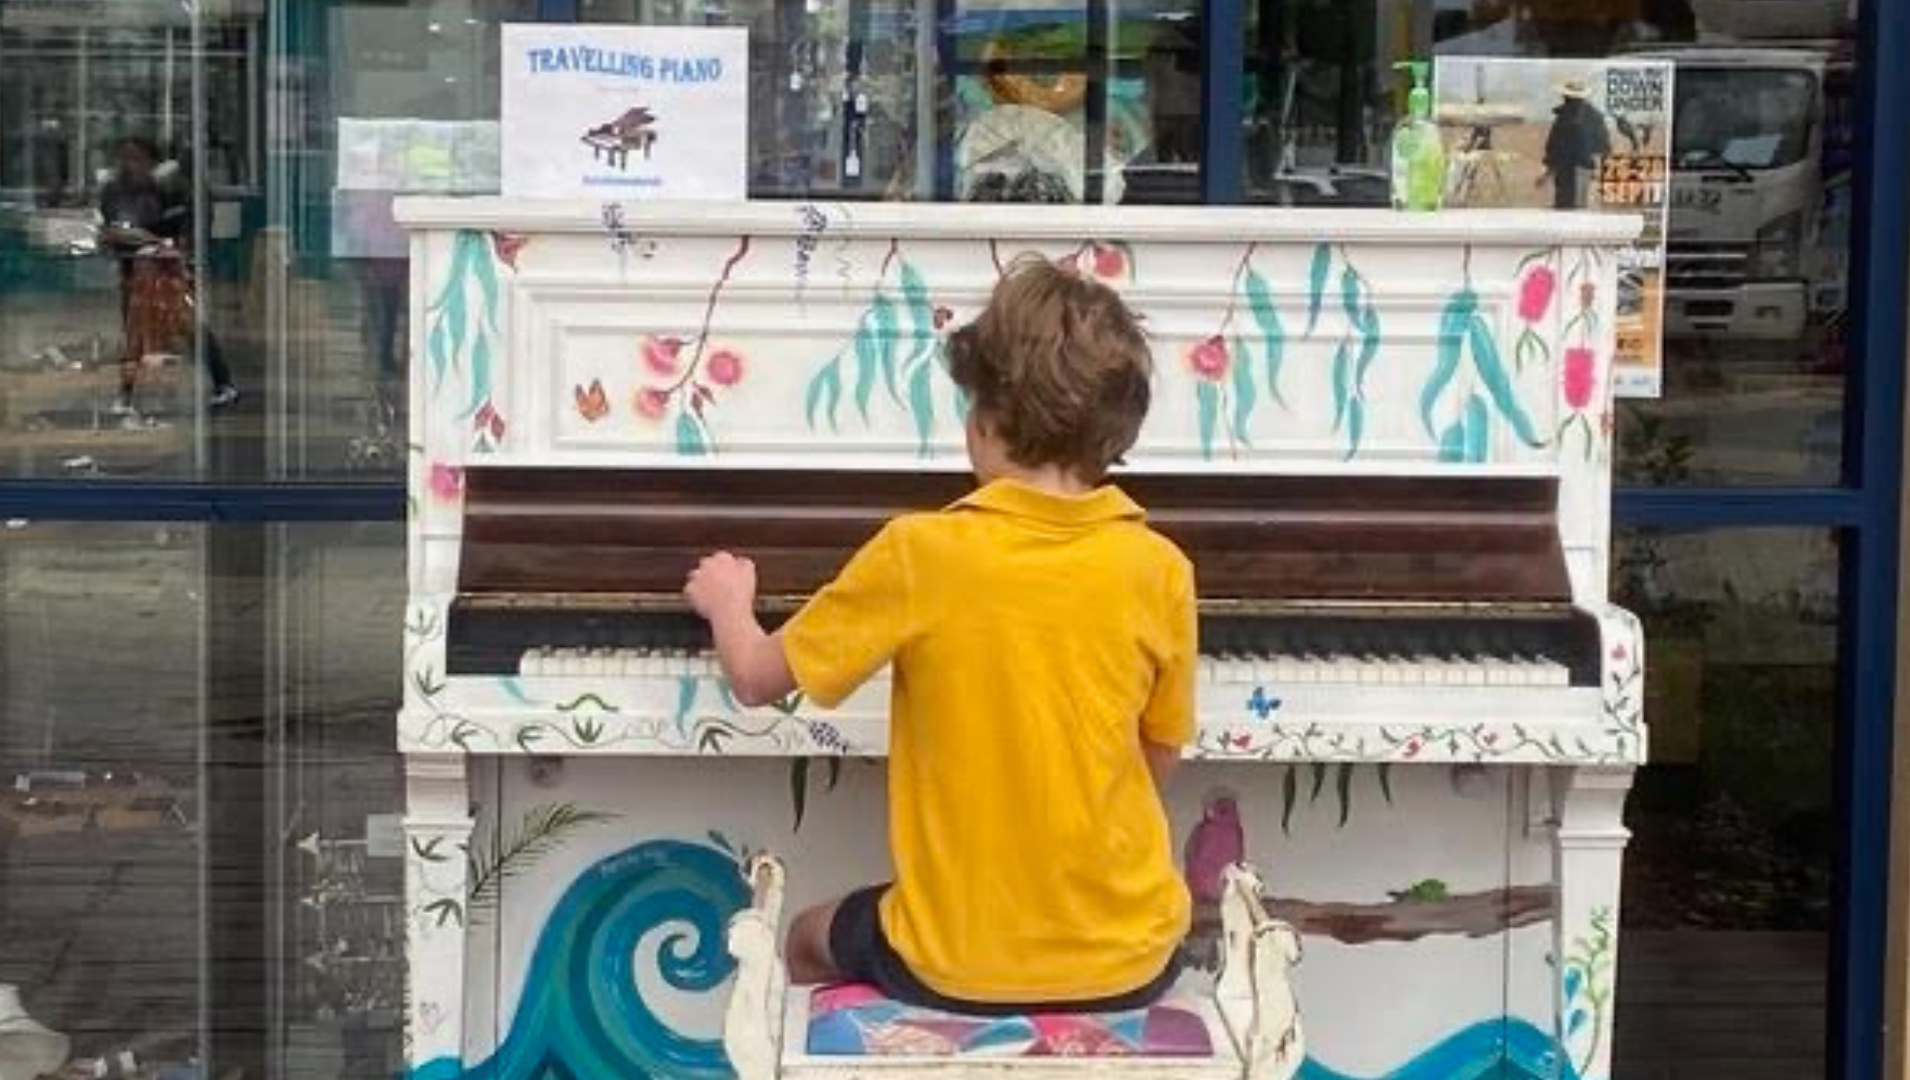 Charlie sitting at the "Travelling Piano" on the Mandurah foreshore, playing enthusiastically